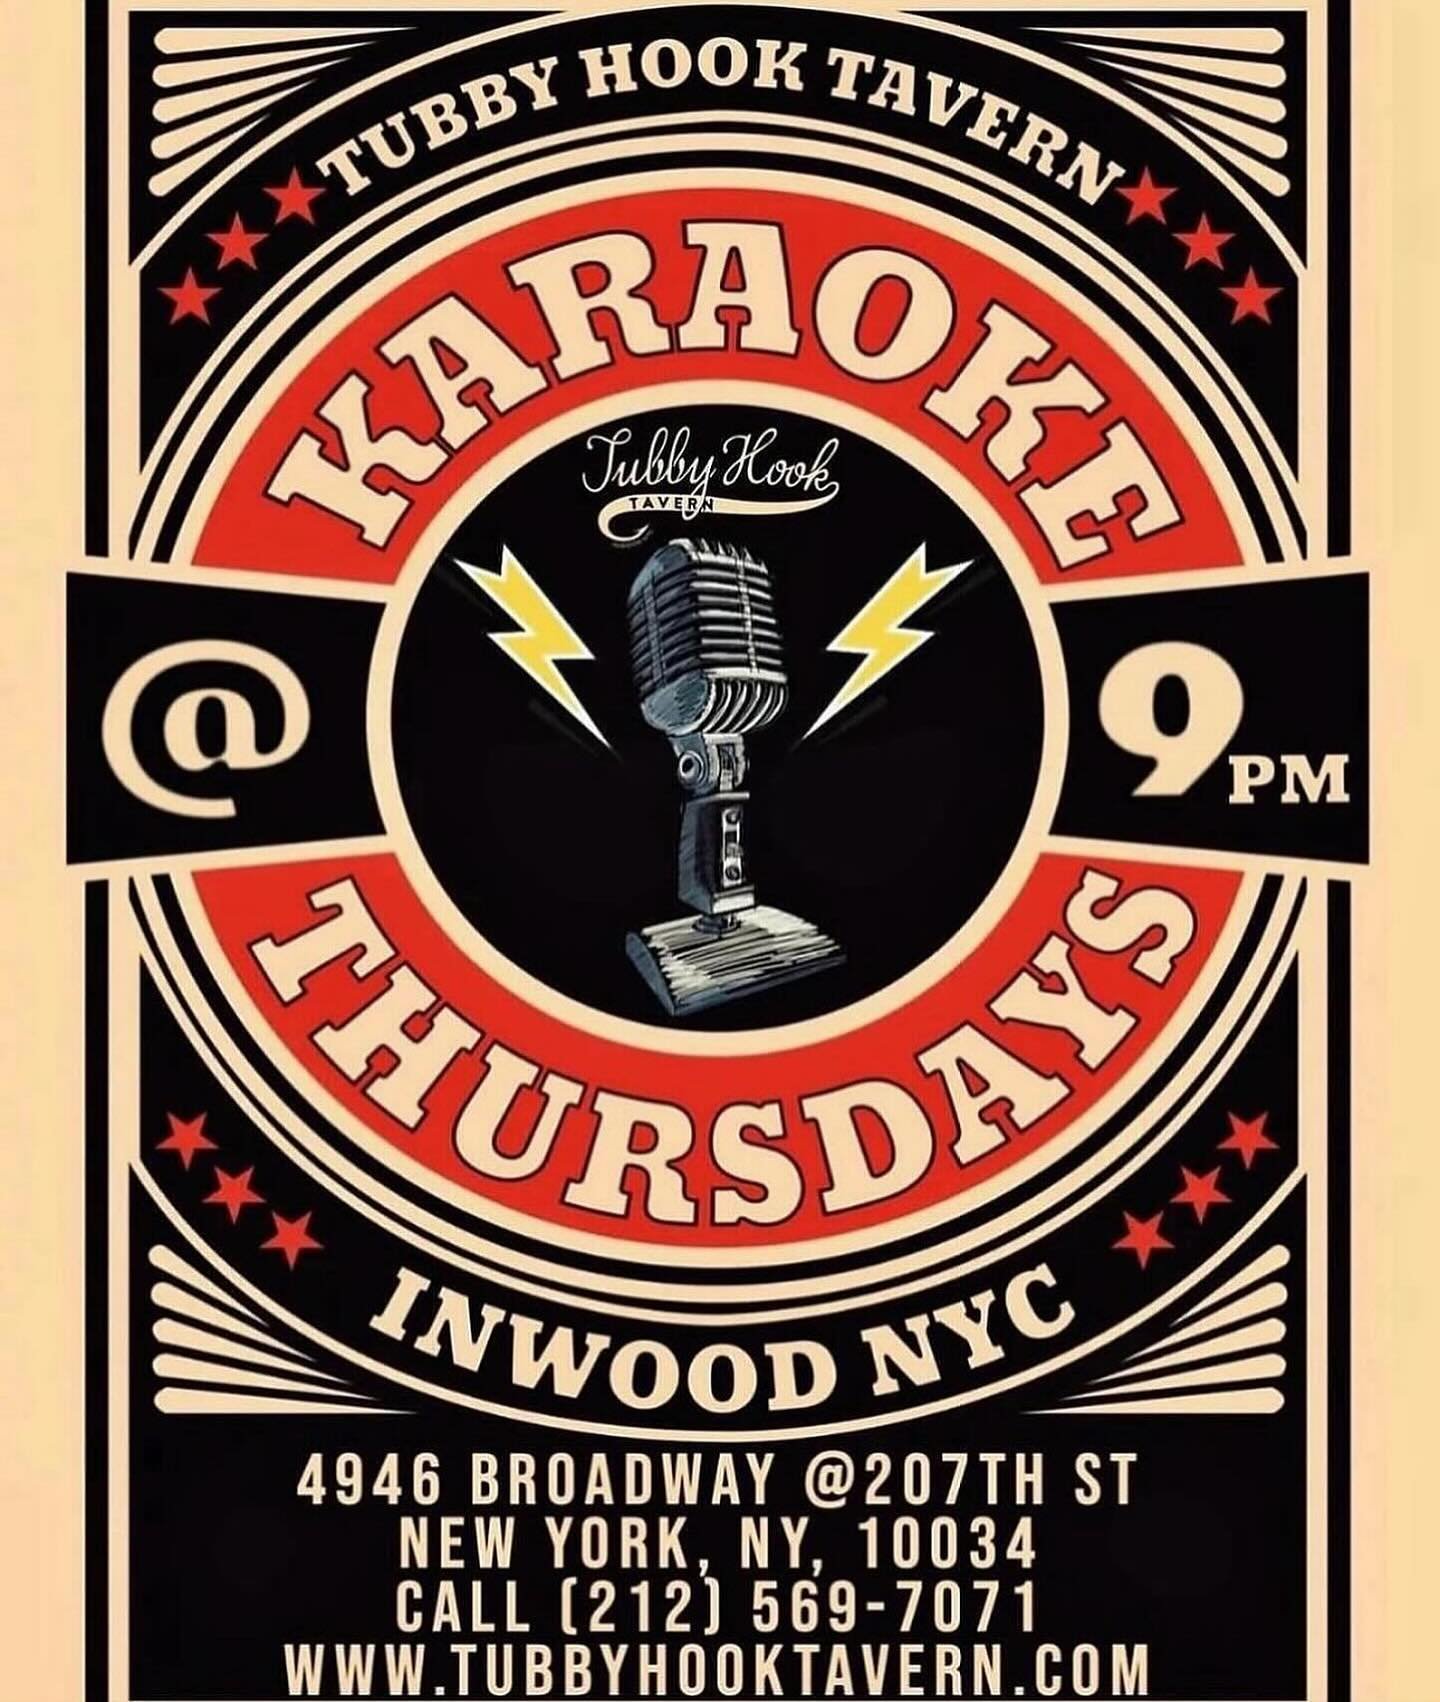 It&rsquo;s Thursday night karaoke at 9pm 🎤

Live Music is back with GEM Saturday night at 8pm 🎸

For reservations call (212) 569-7071 or email us at info@tubbyhooktavern.com

4946 Broadway @207th

www.TubbyHookTavern.com

#inwood #inwoodnyc #uptown